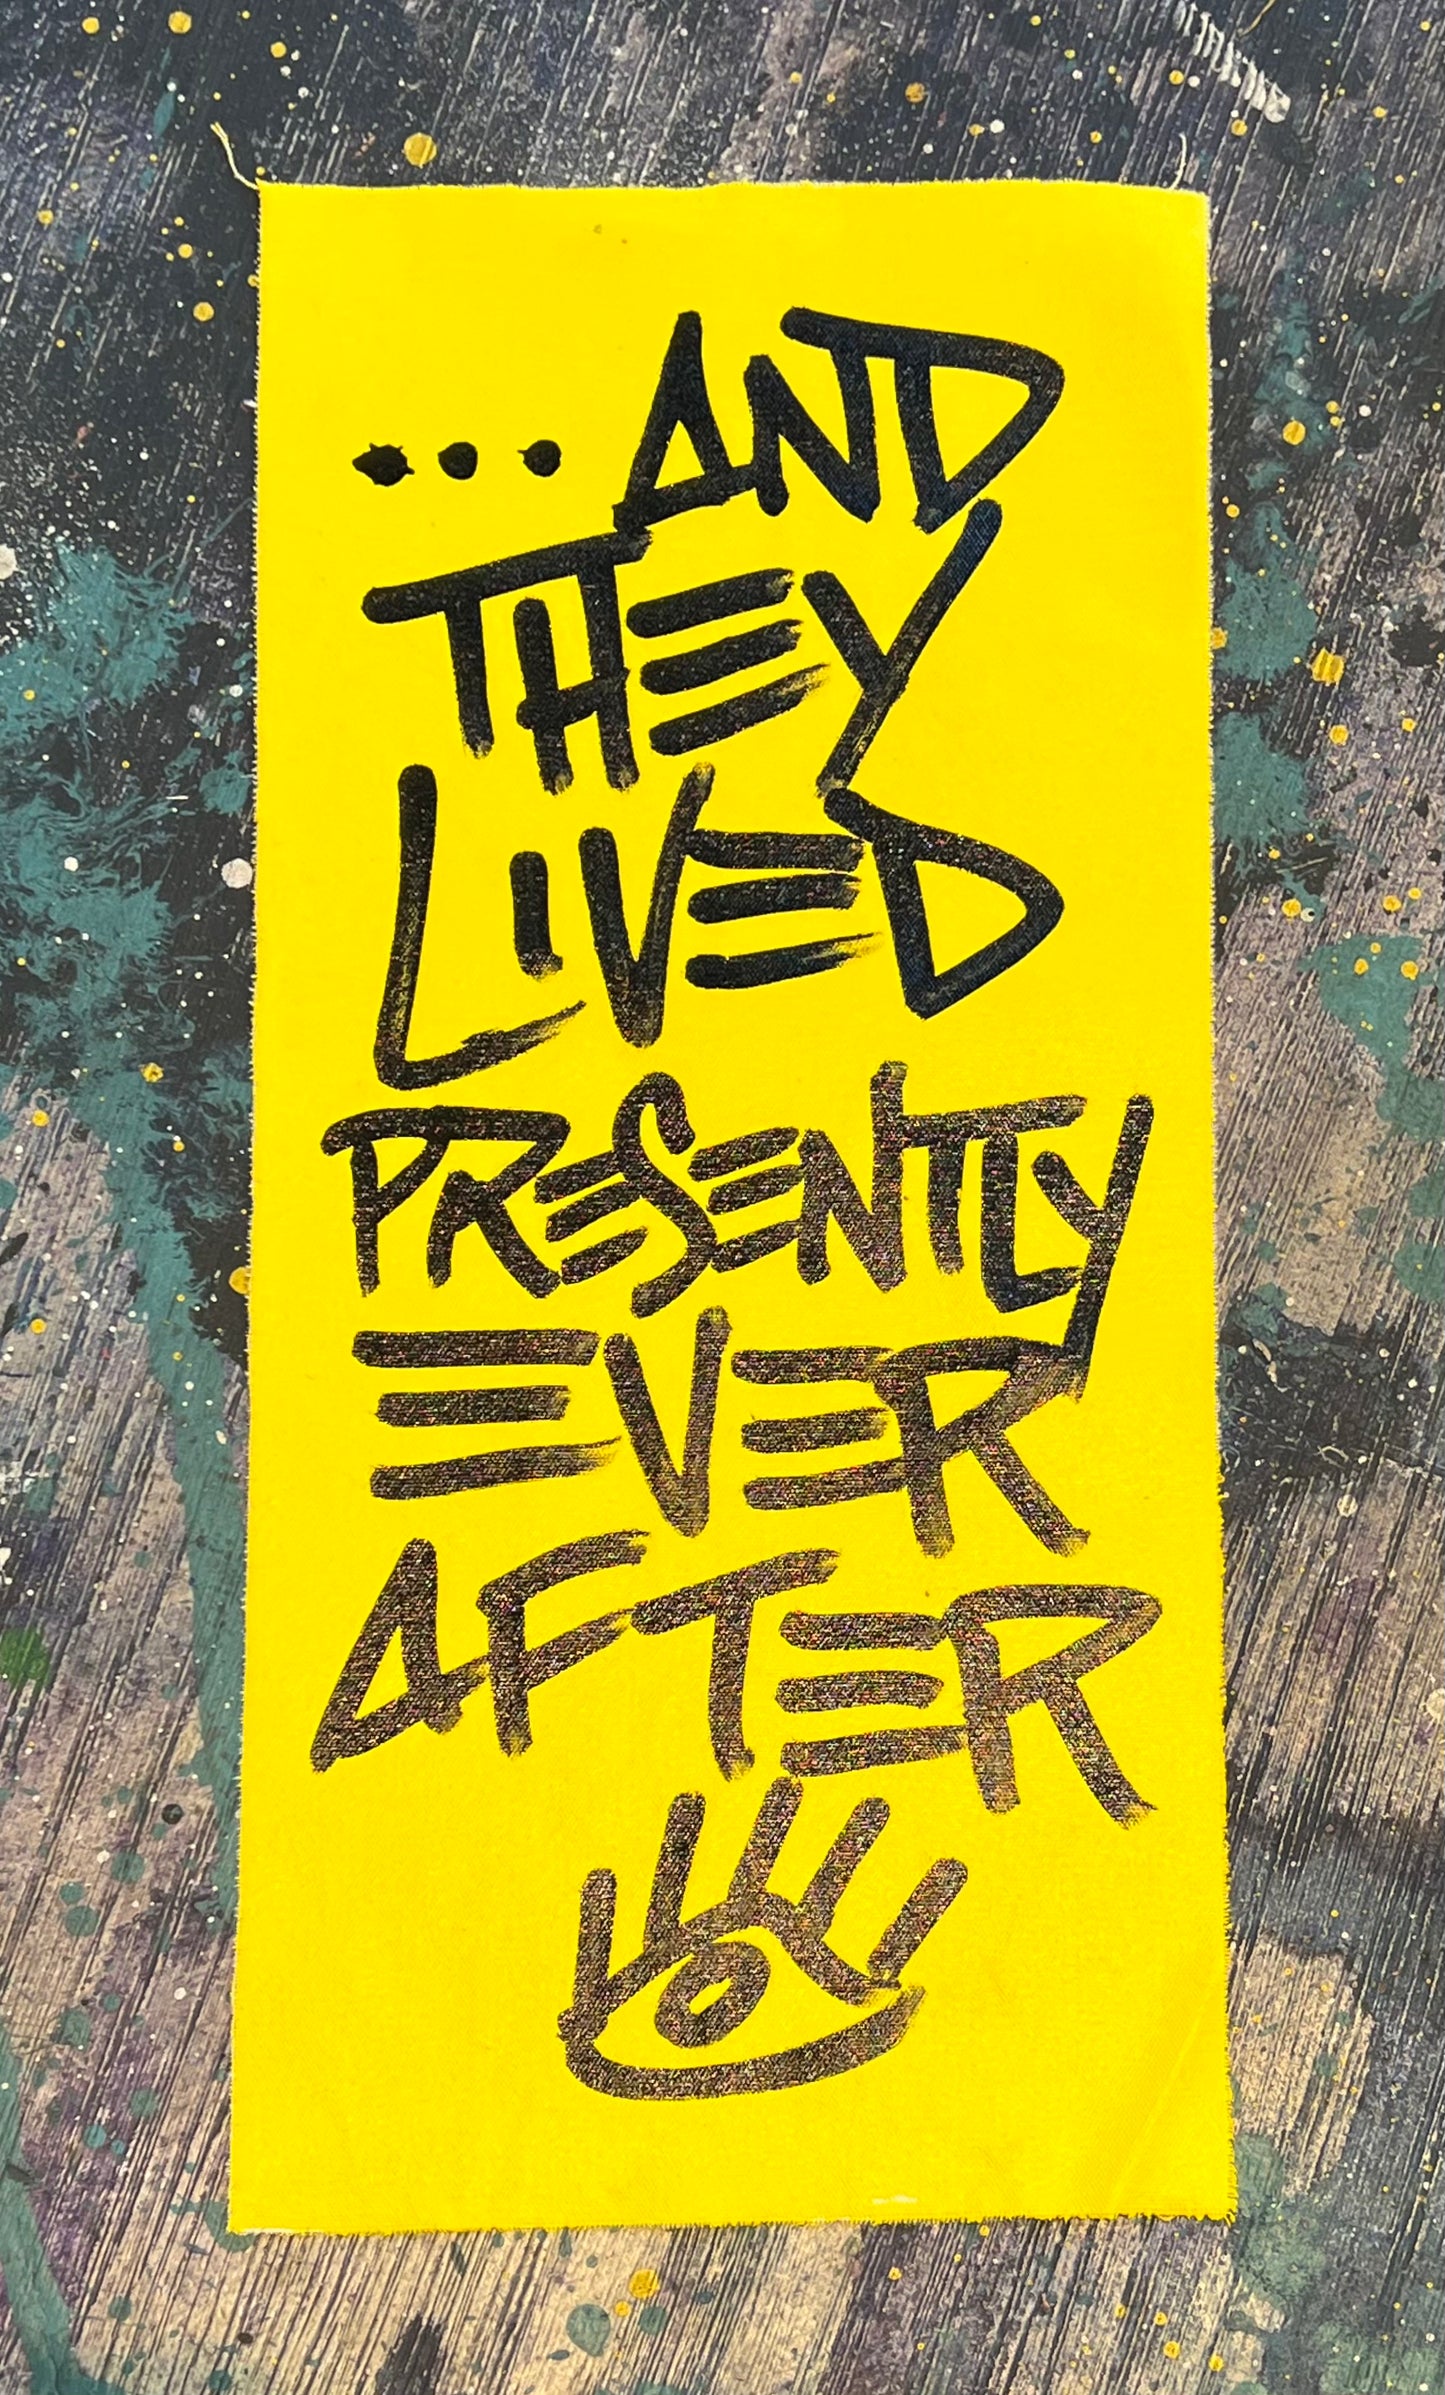 Presently ever after / black+yellow mantra / August 2023